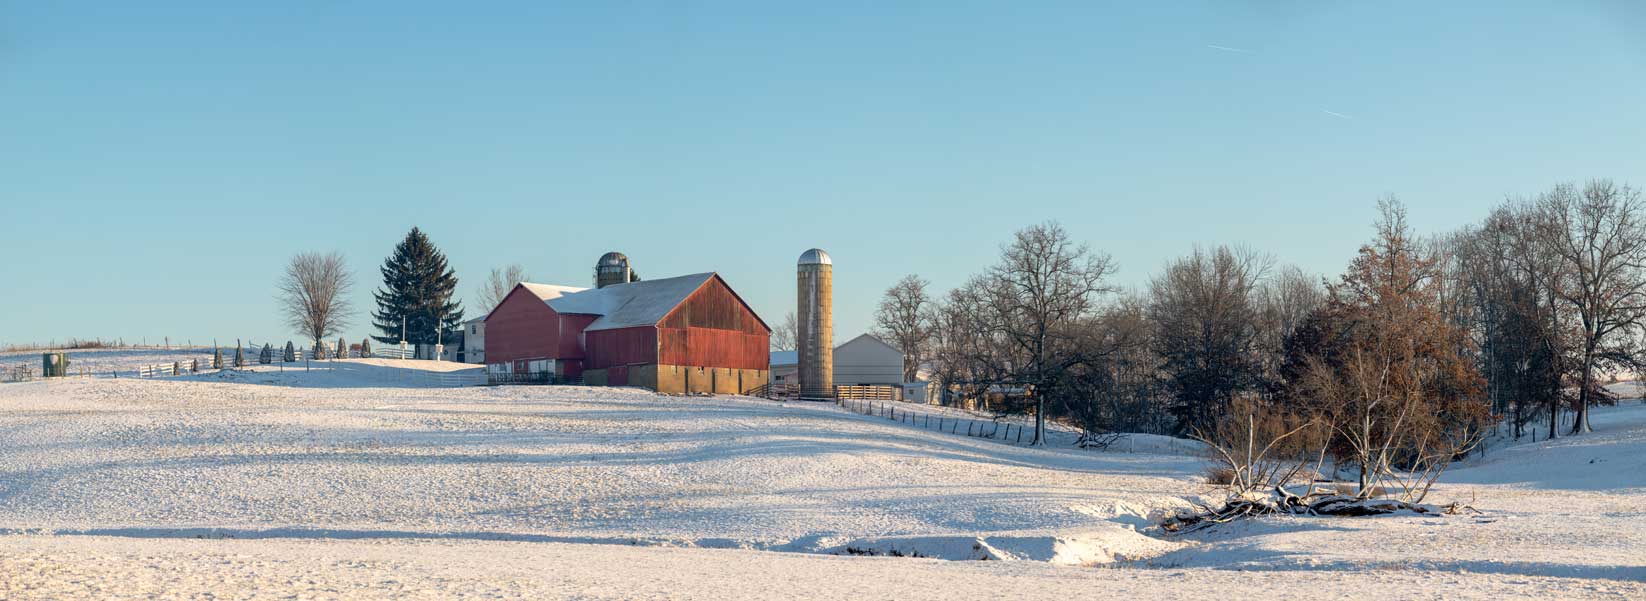 Snow covered barn in Holmes County, Ohio